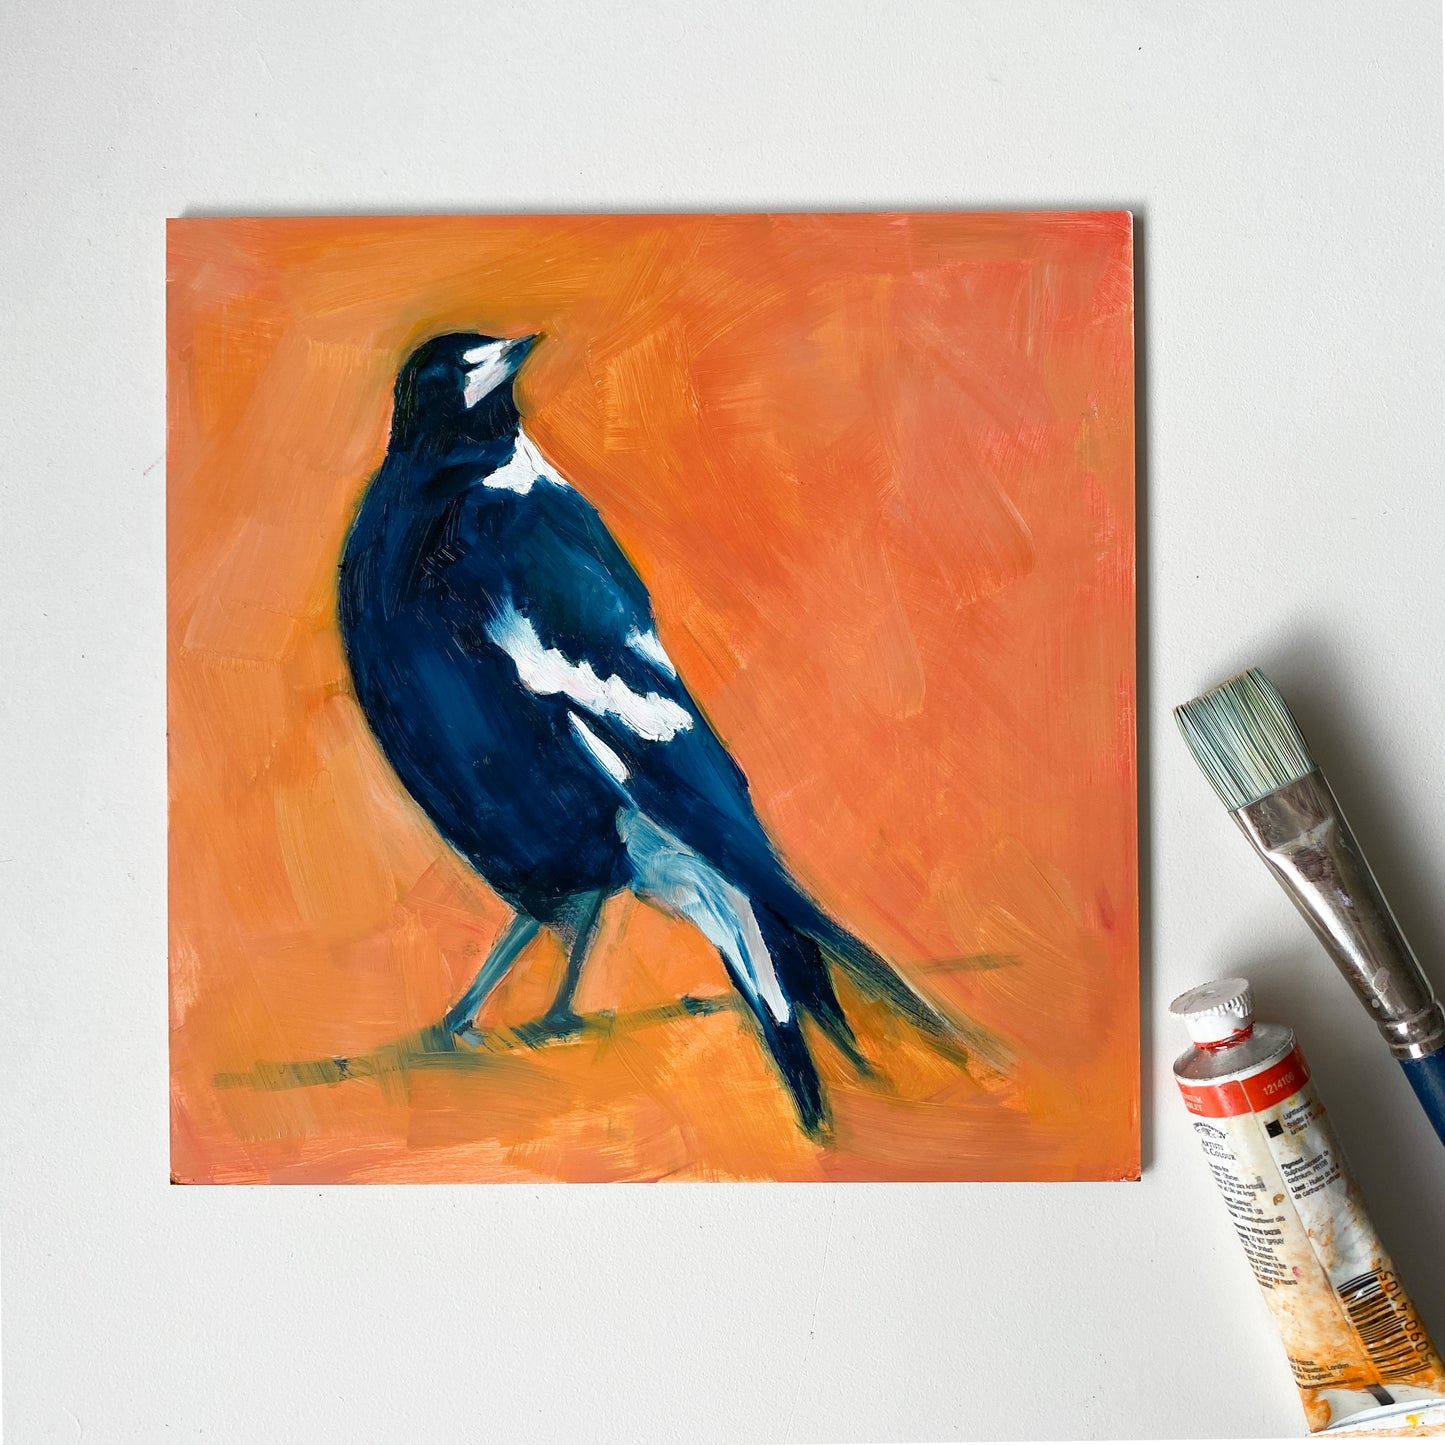 image of an impressionistic oil painting of a navy blue and white magpie looking up on a bright and textured orange background. the artwork is on a white table and there is a paint brush and oil paint tube next to it.